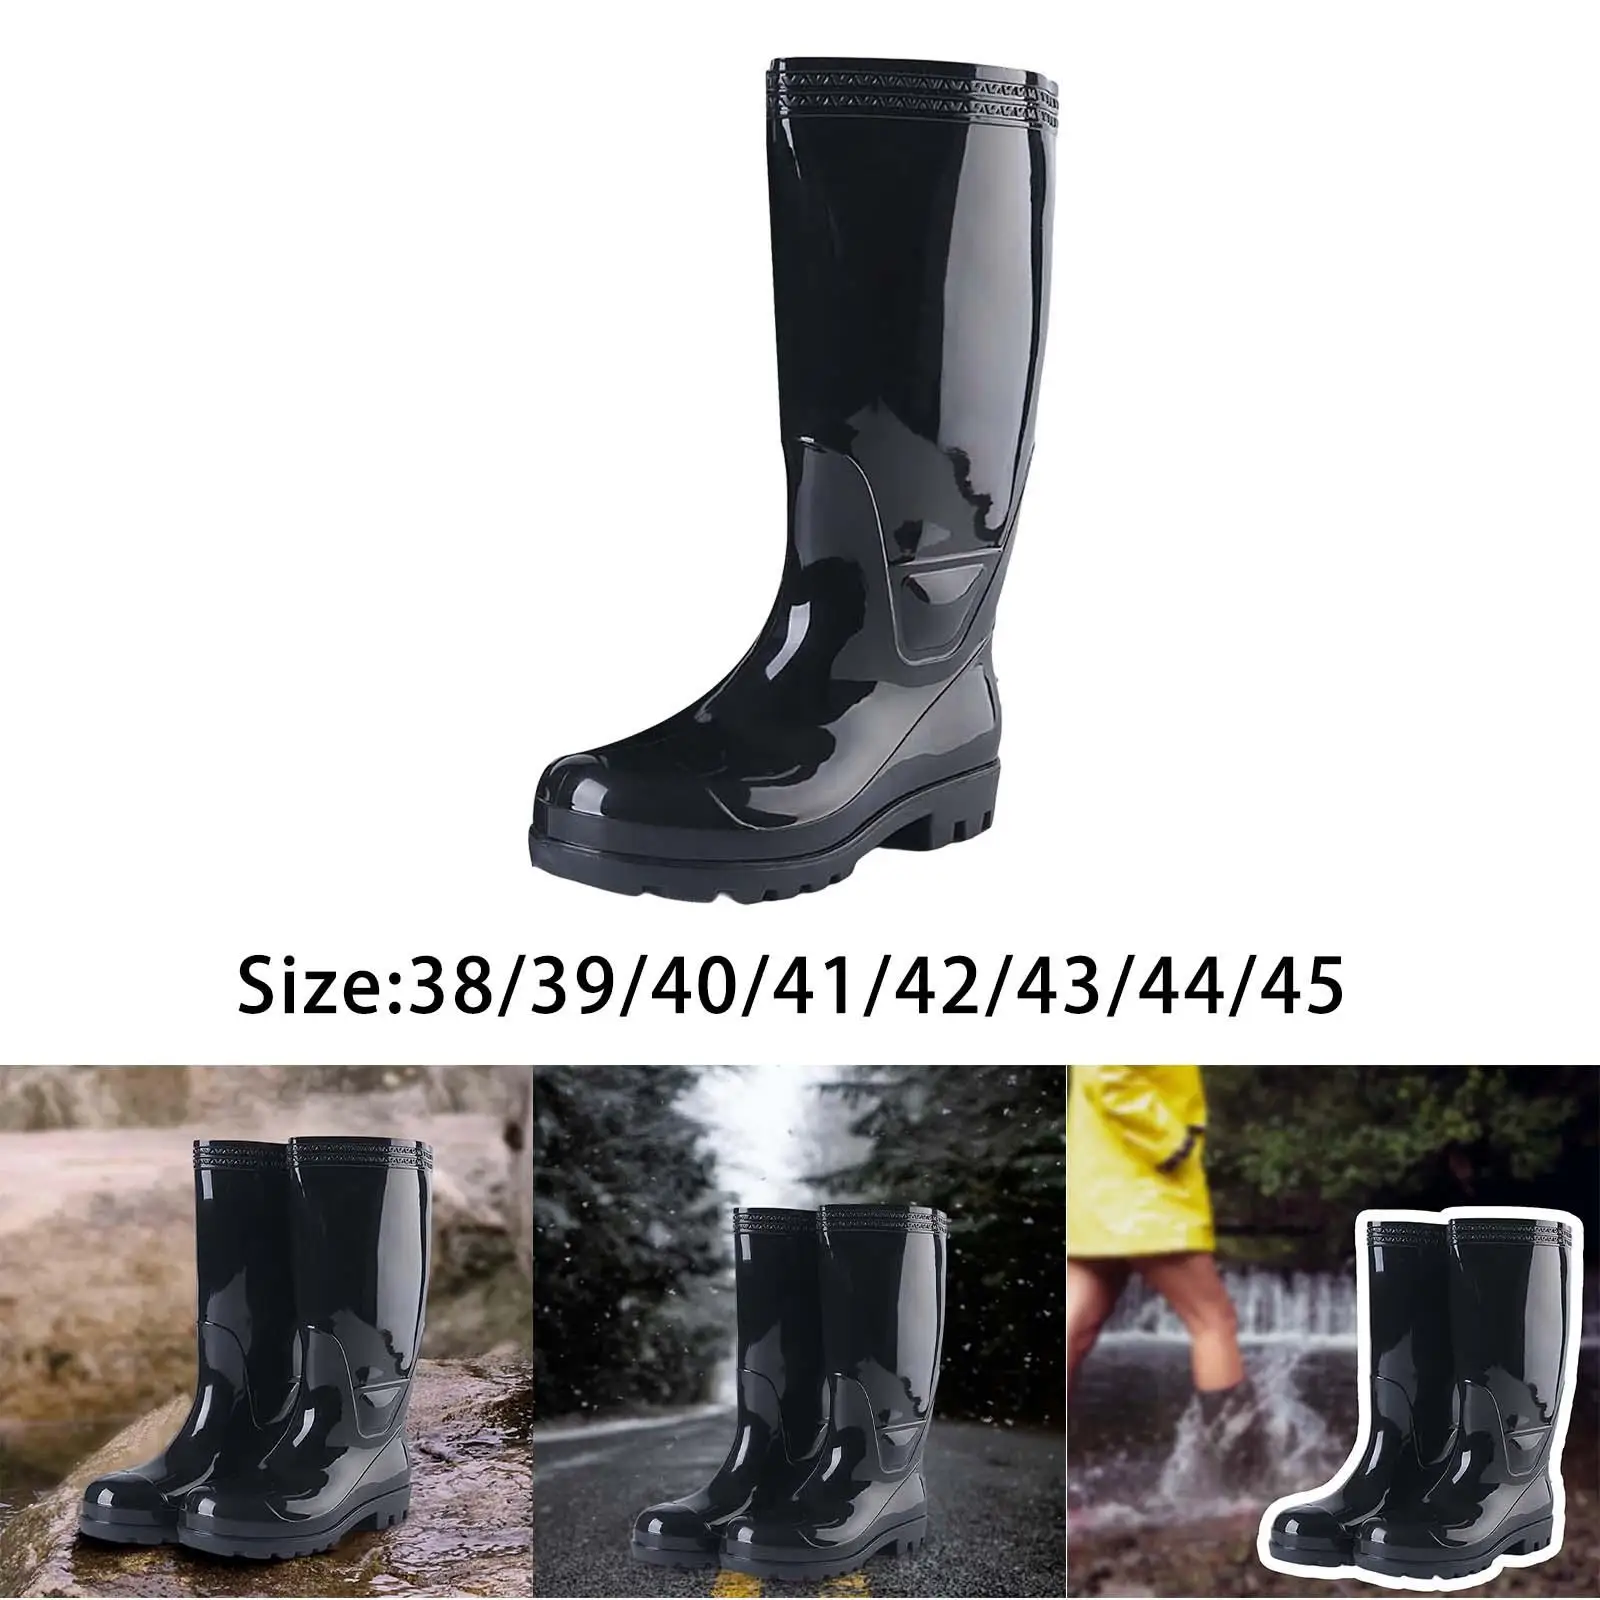 Rain Boots Steel Toe Puncture Resistant Waterproof Work Boots Durable Anti Slip Rubber Boots for Men Knee High Boot for Farming